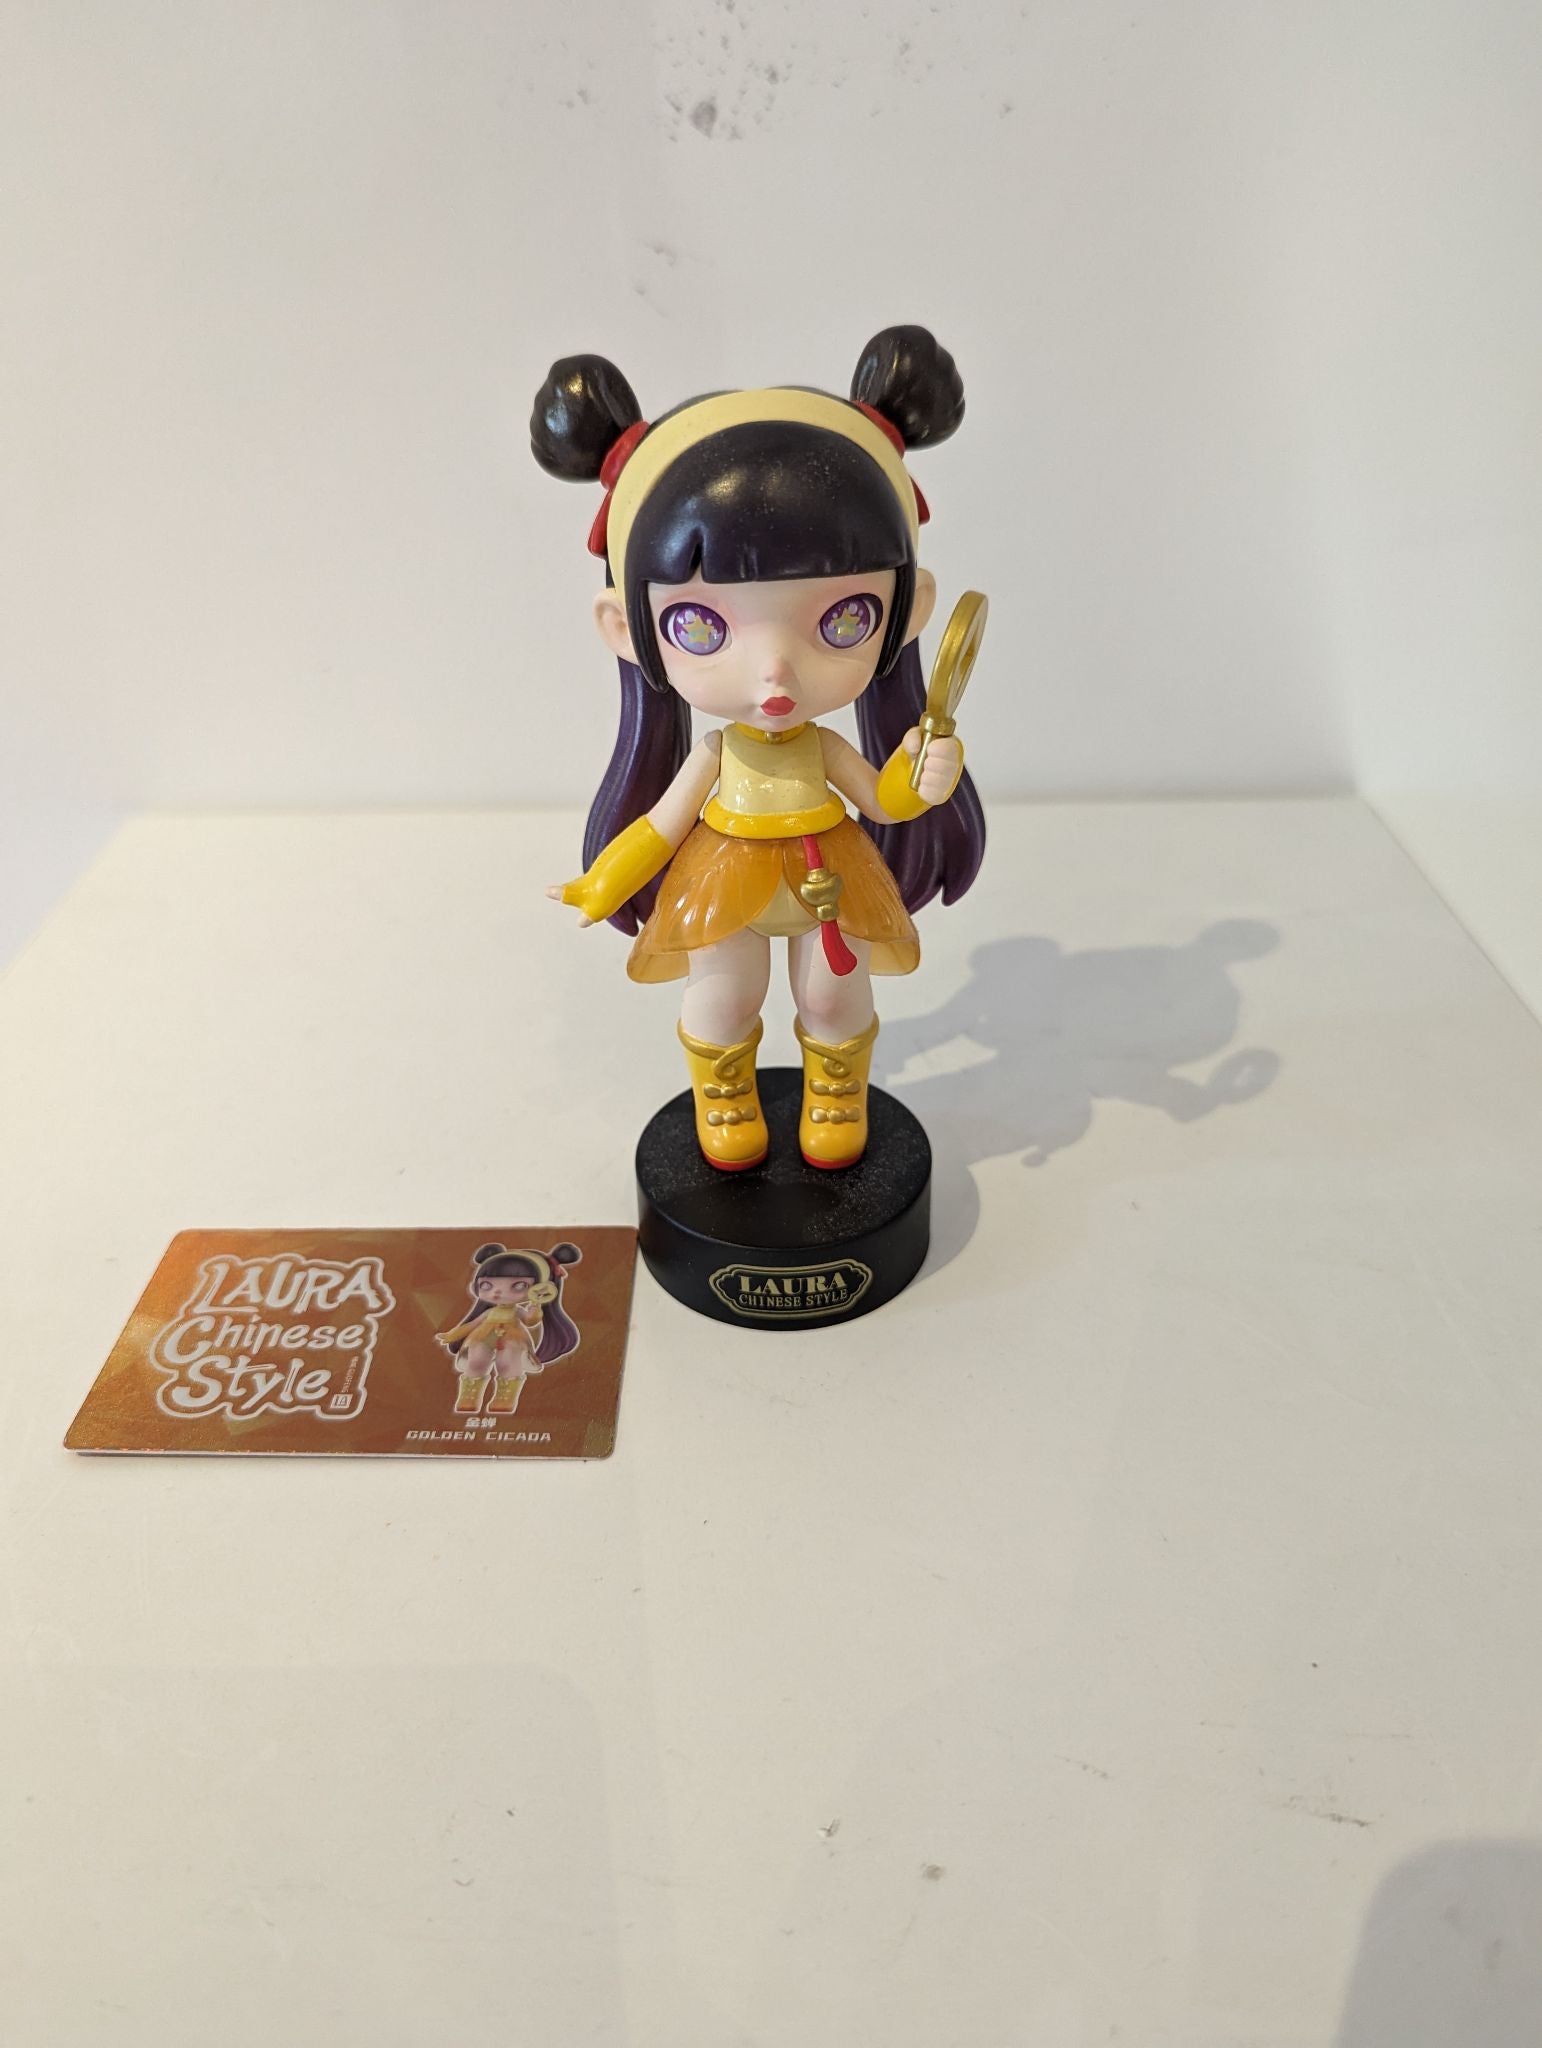 LAURA - Chinese Style - Token Toys - 1